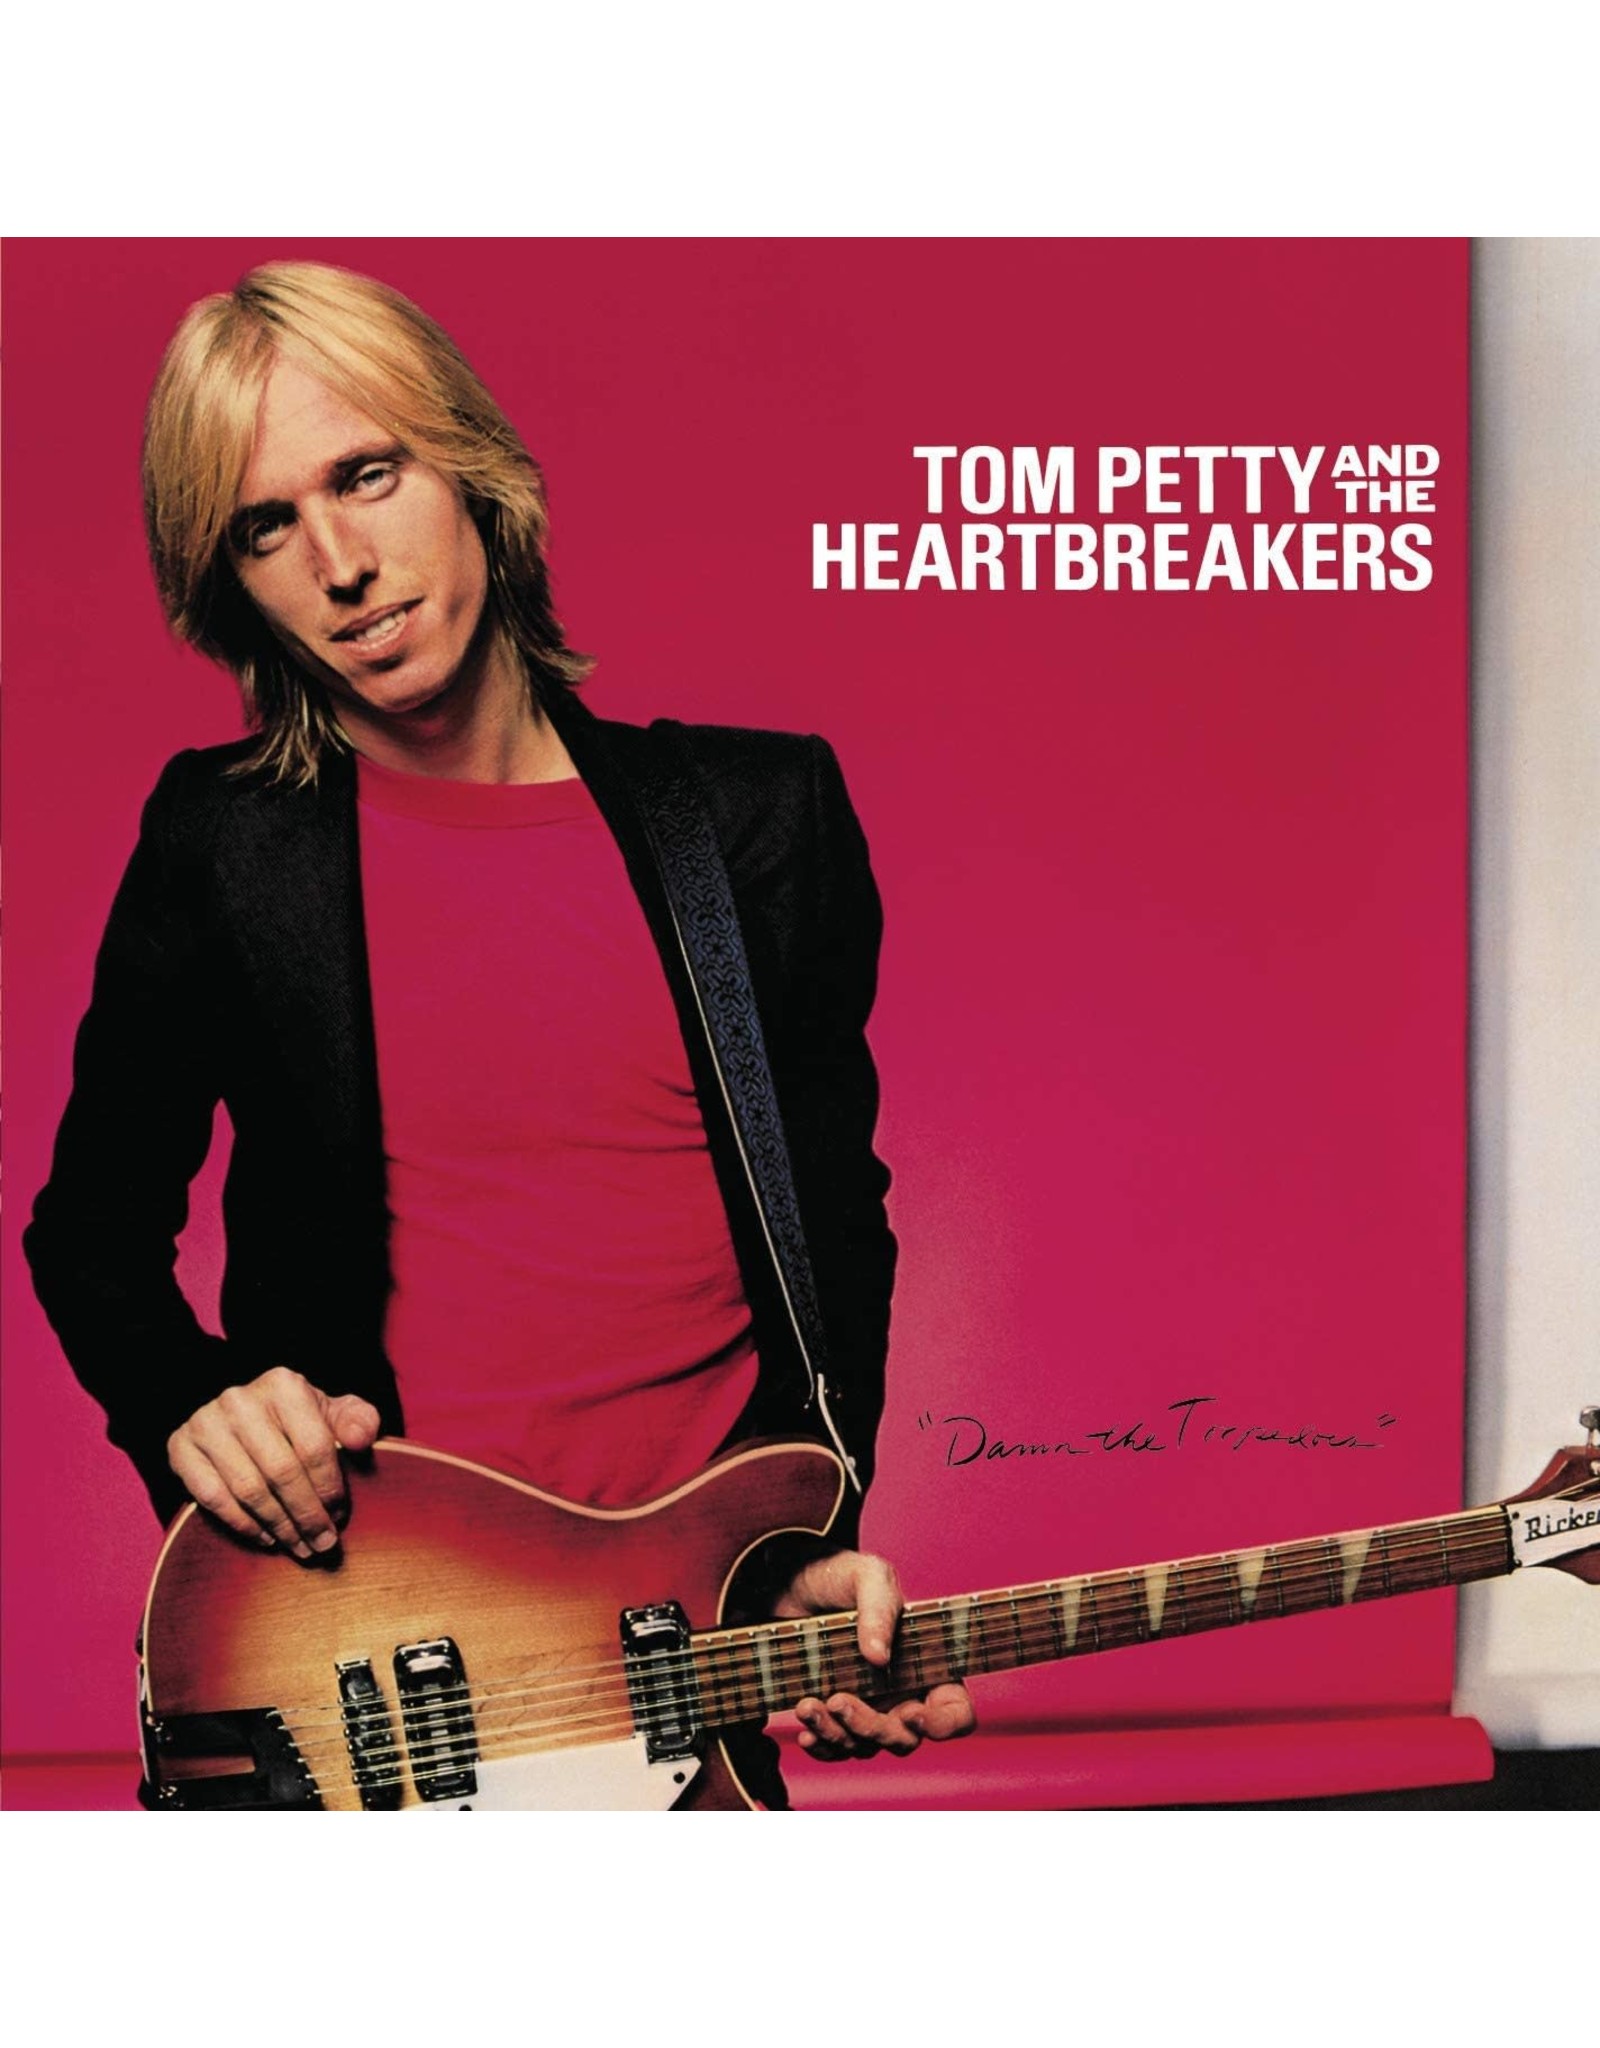 Tom Petty - Damn The Torpedoes (Exclusive Red Vinyl)